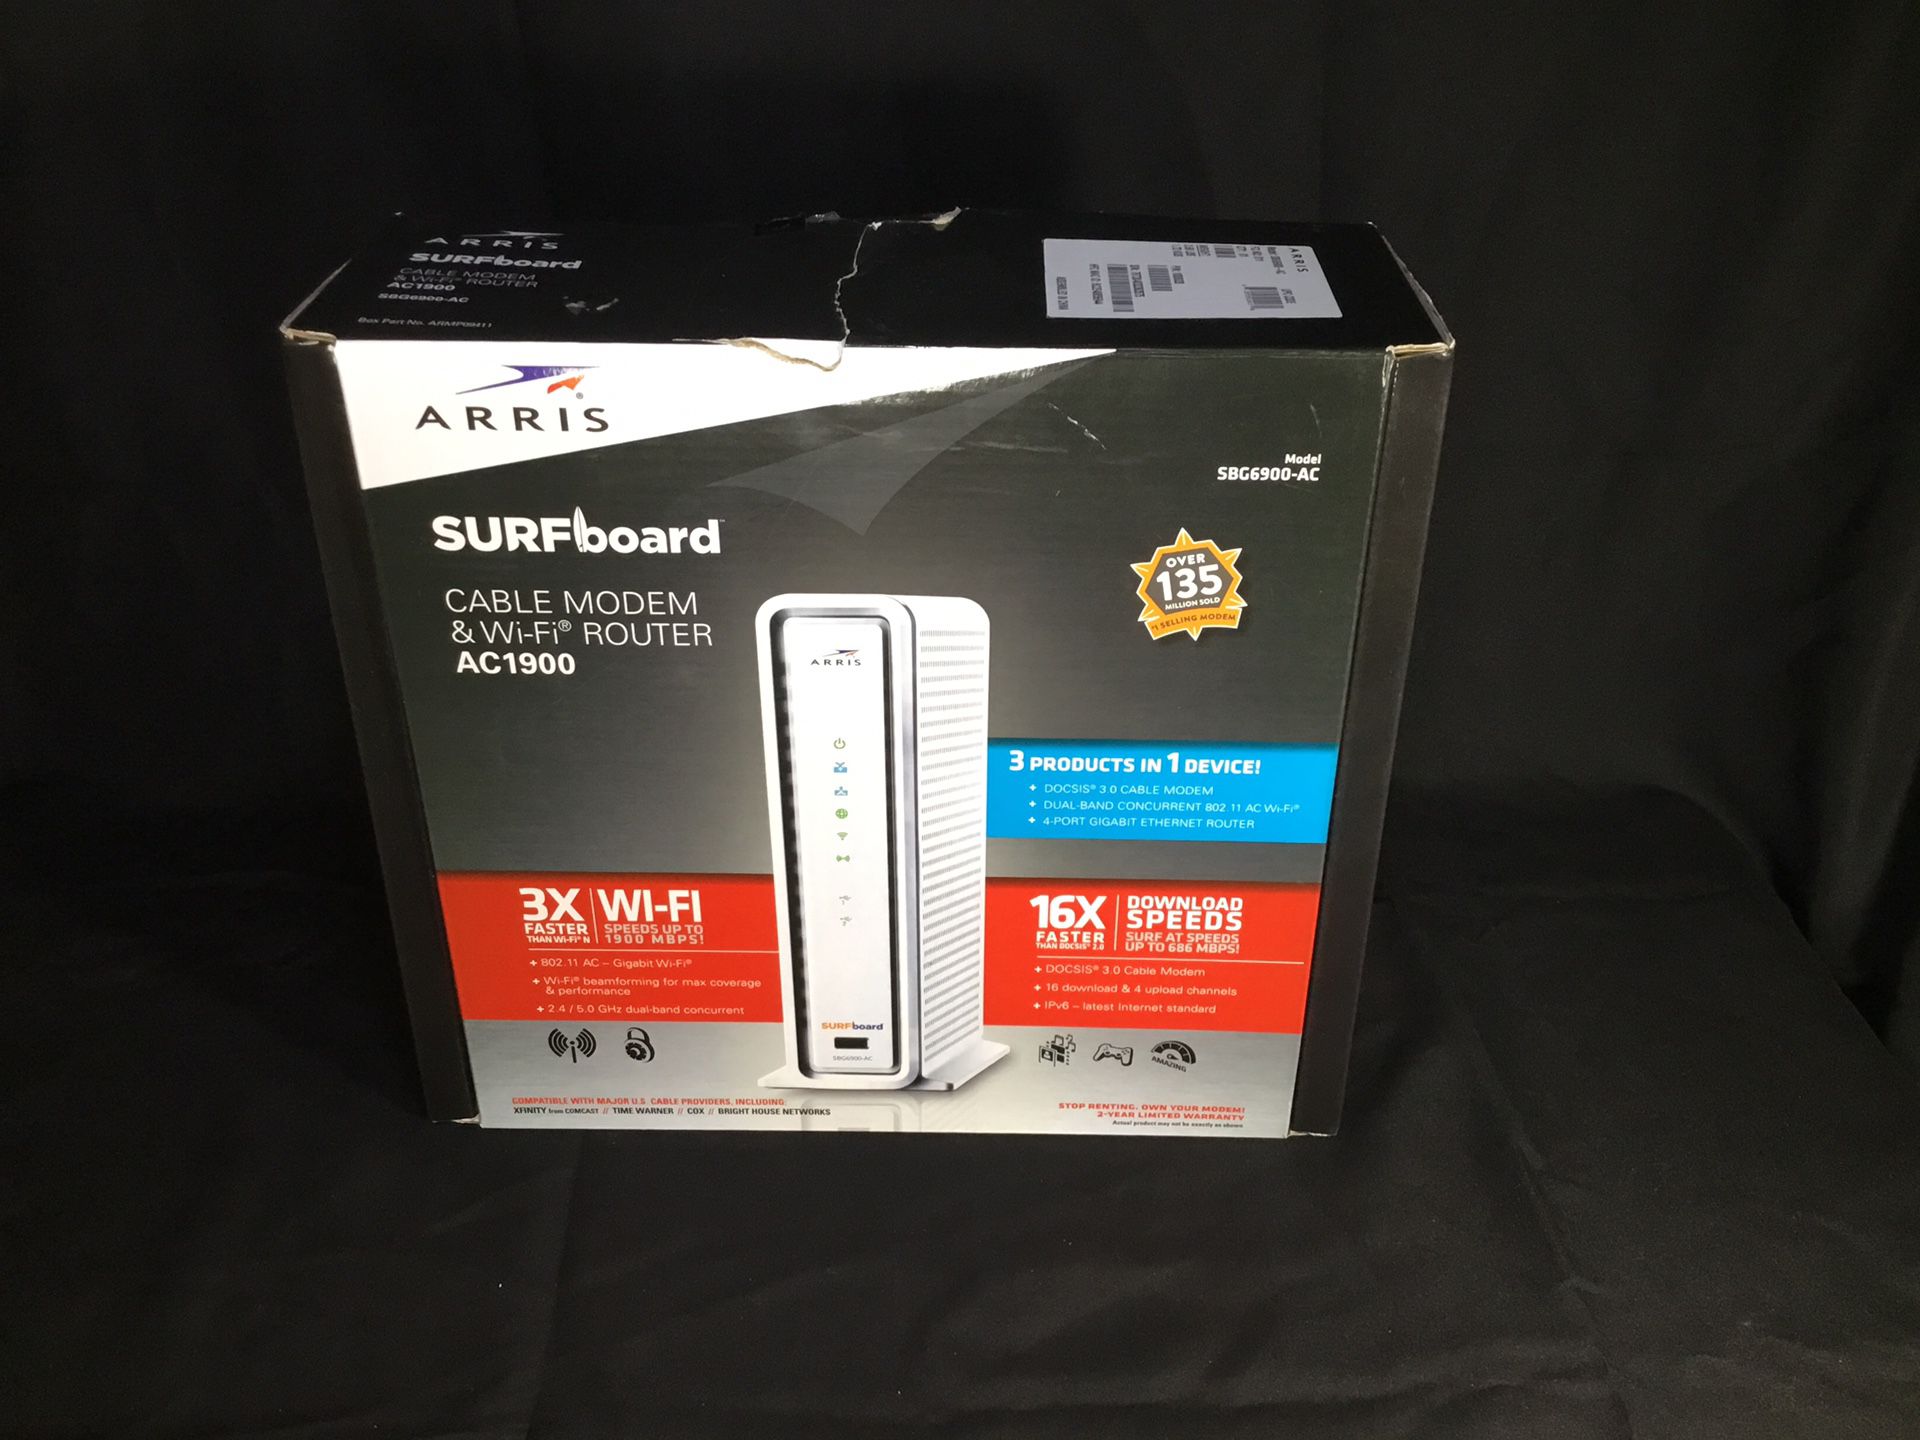 Arris Surfboard AC 1900 Modem and WiFi Router